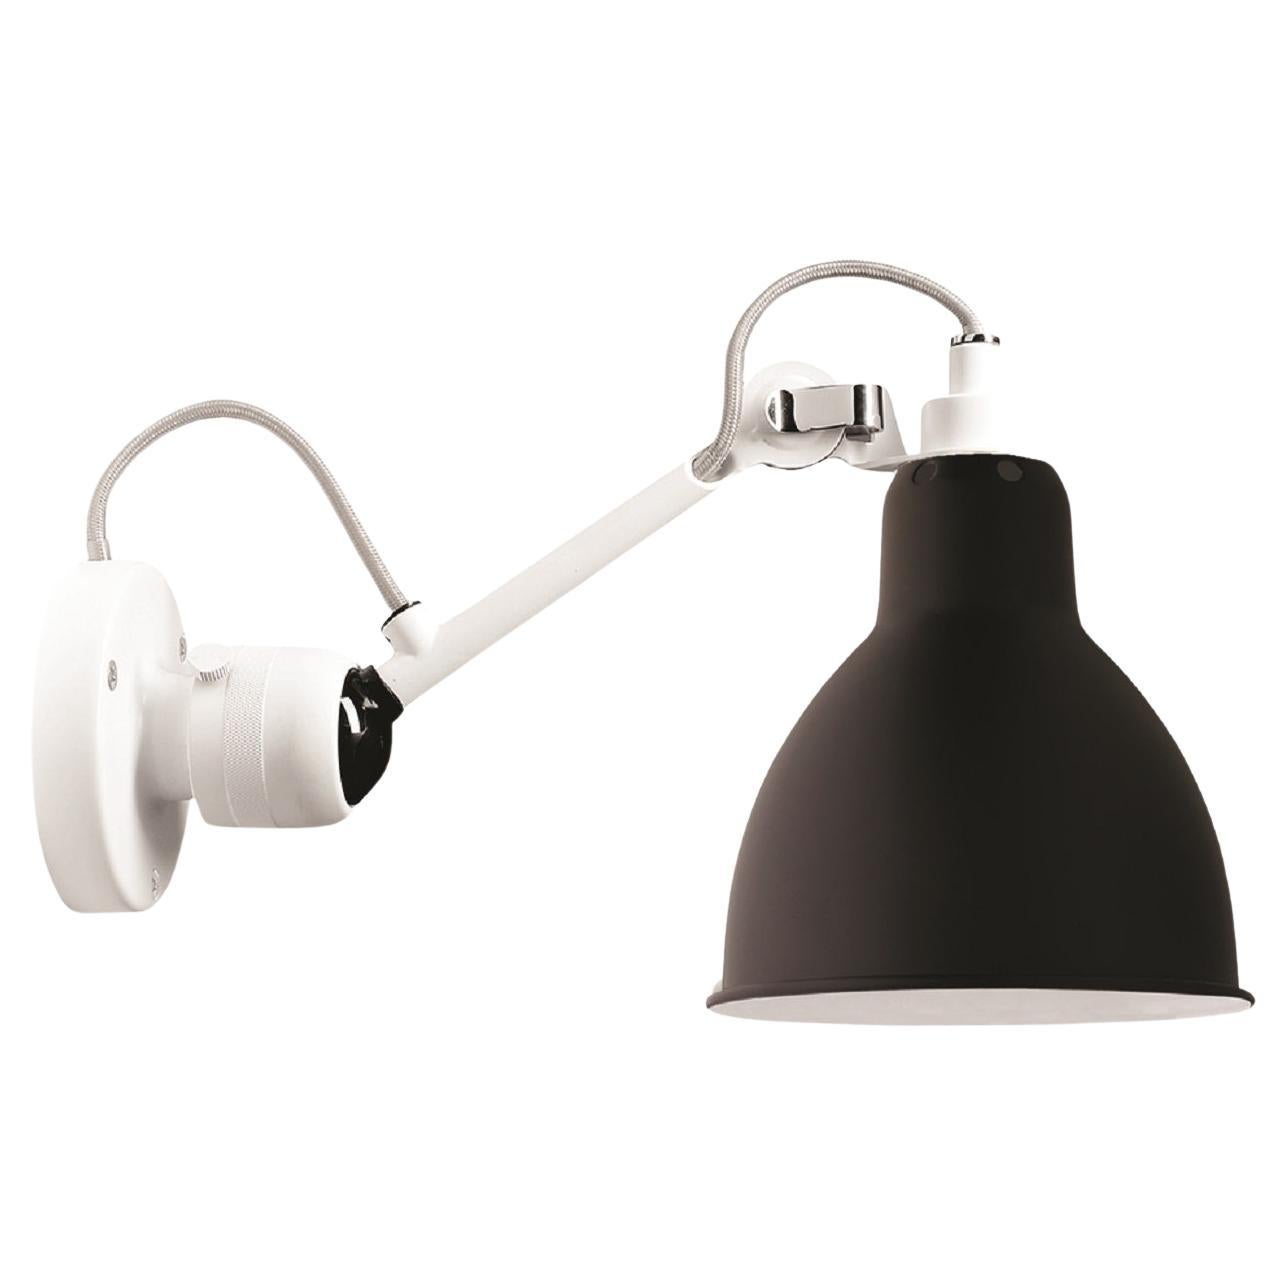 DCW Editions La Lampe Gras N°304 Wall Lamp in White Arm and Black Shade For Sale